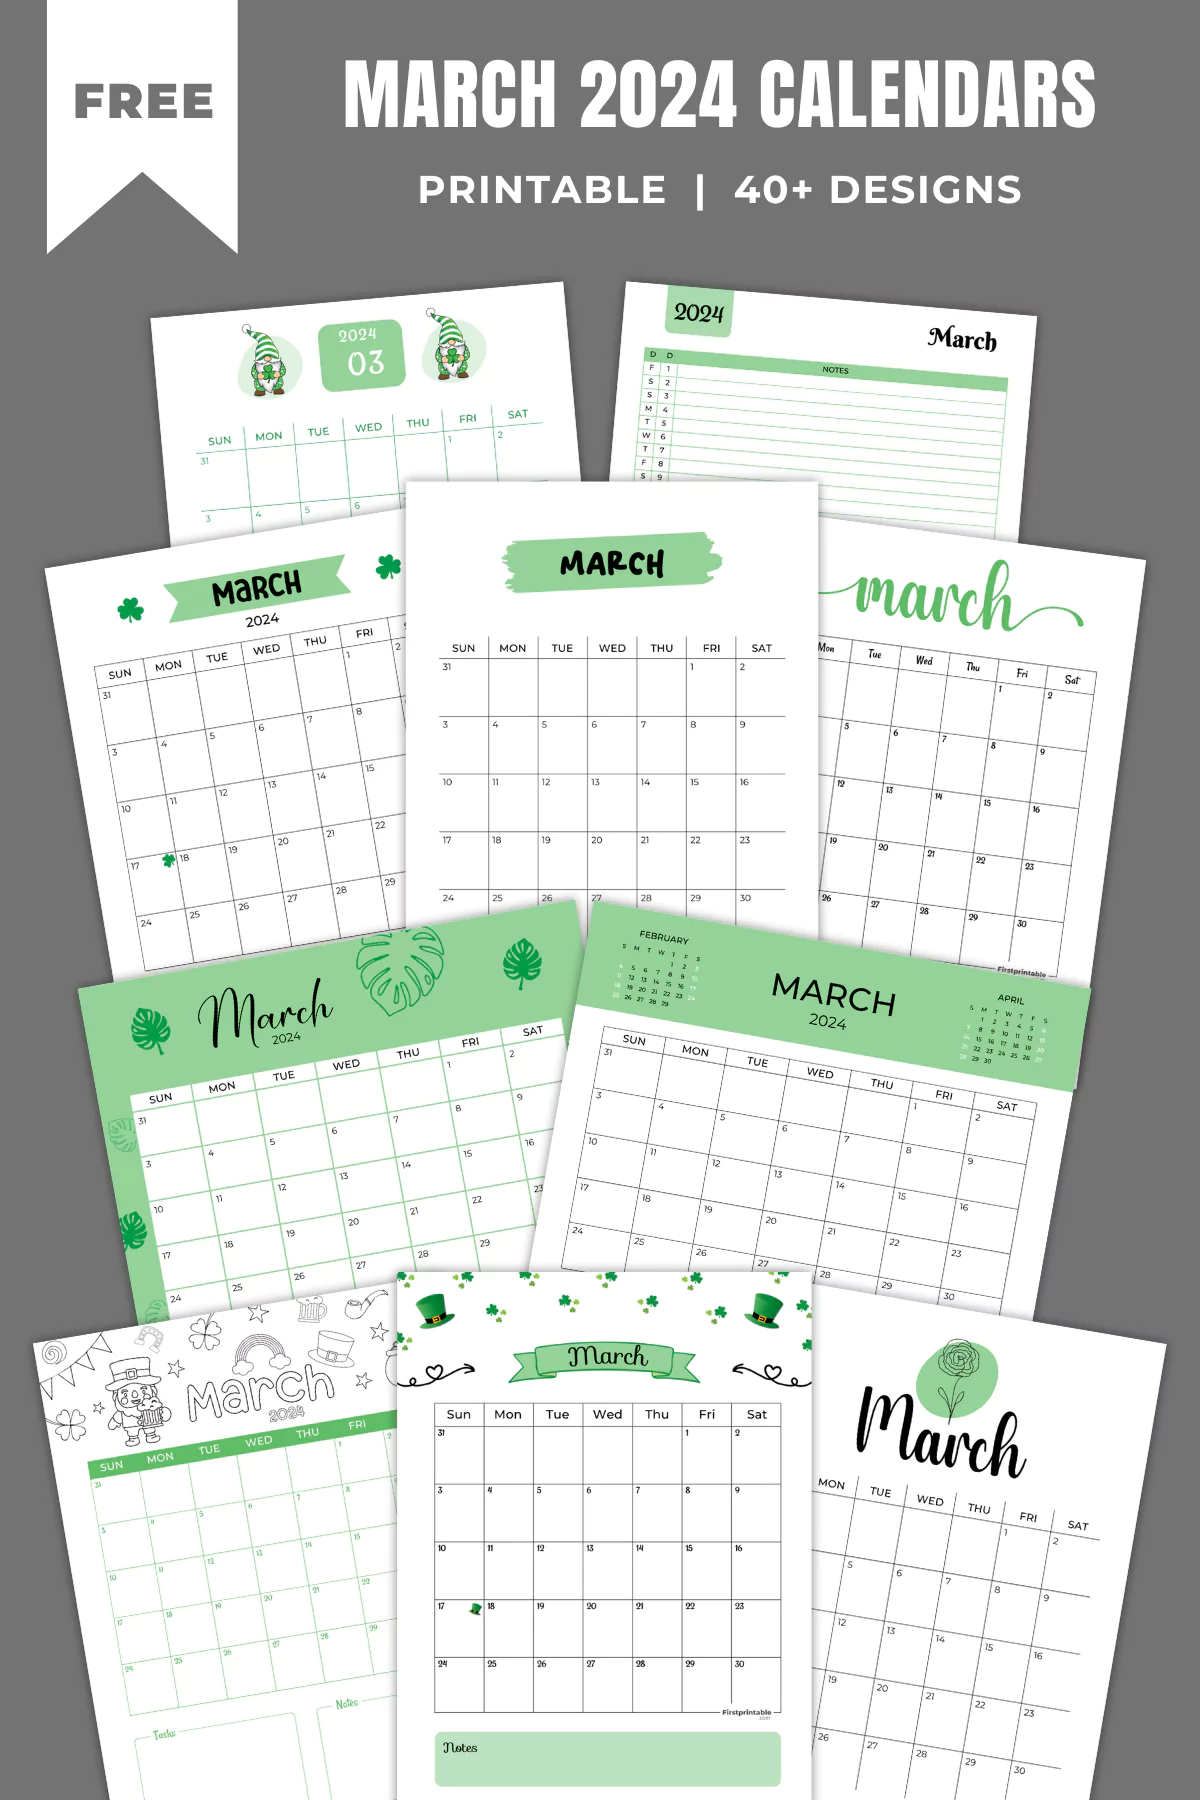 Click here for March Calendars - New!